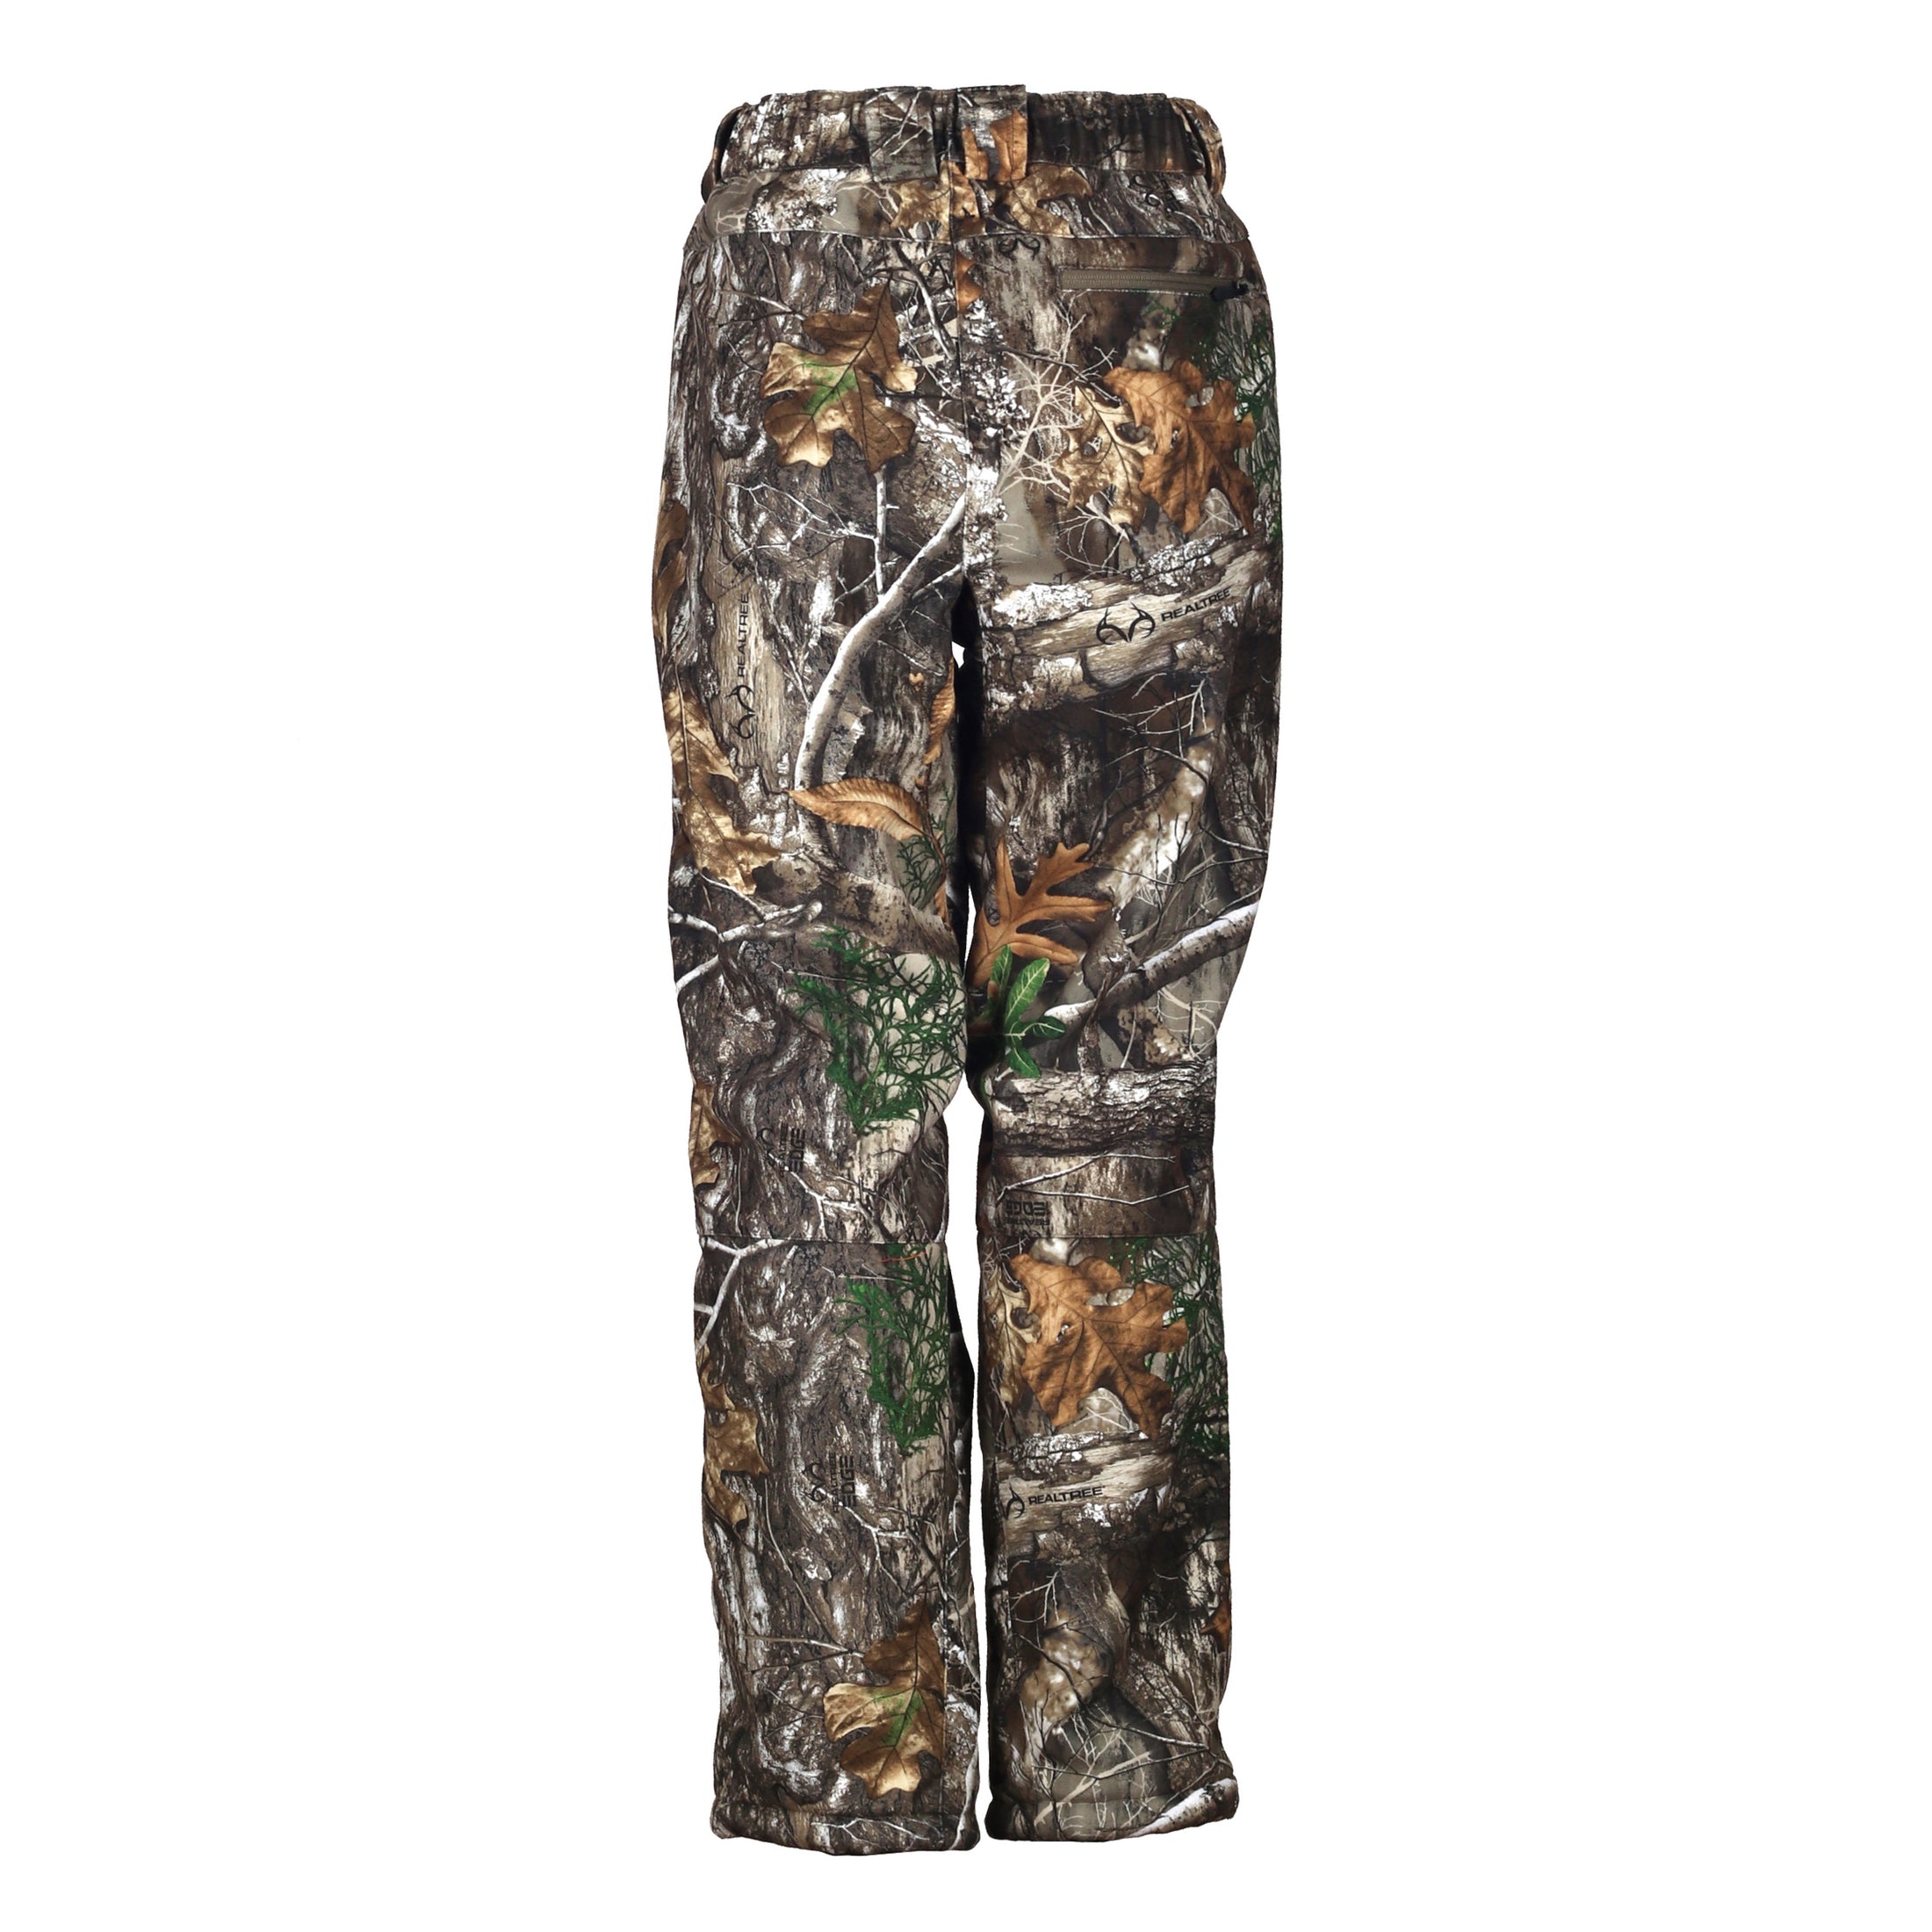 gamehide Pinch Point Pant back (realtree edge)